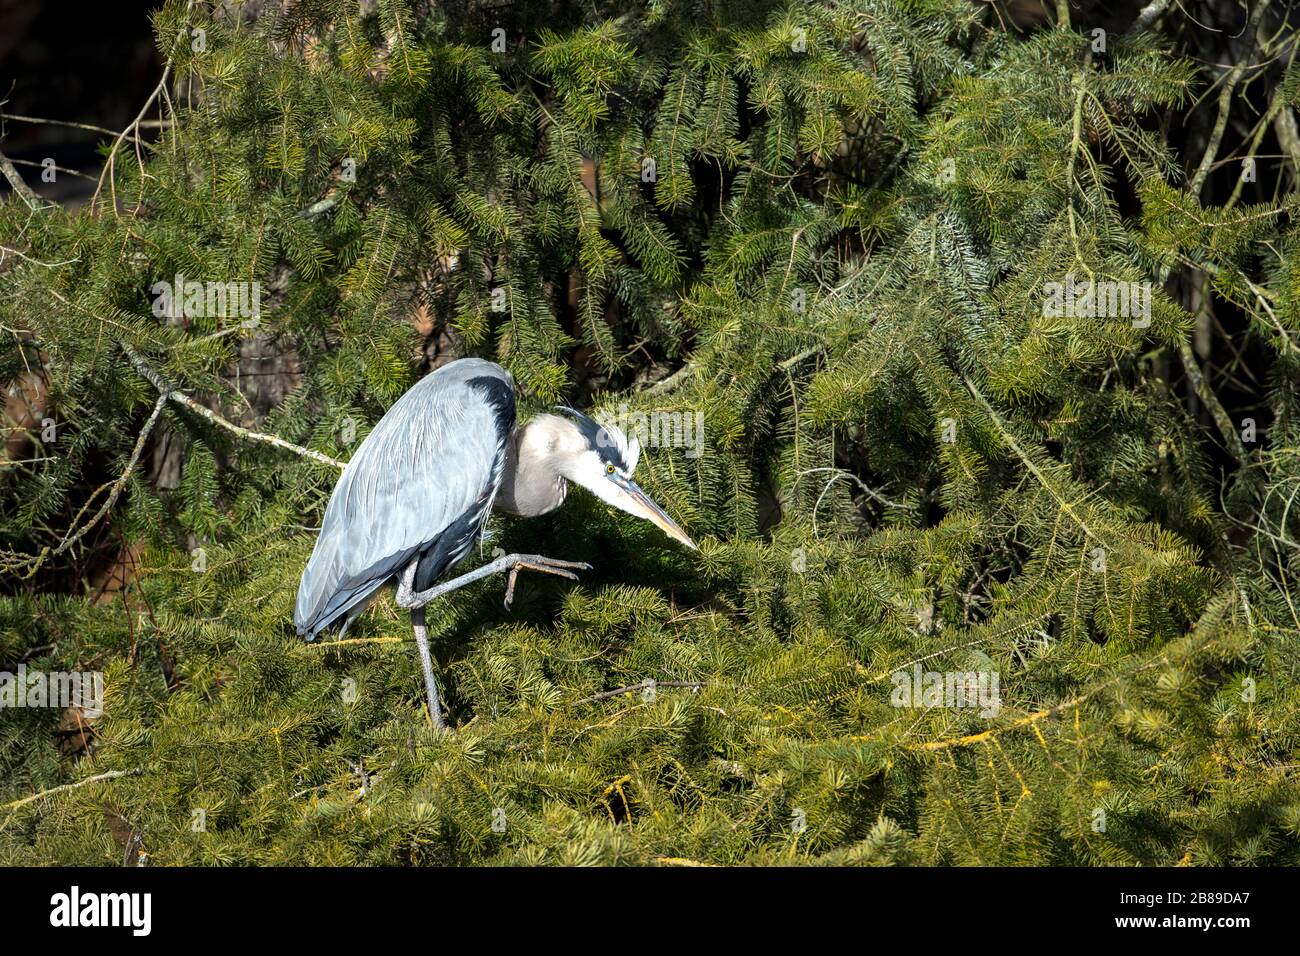 A great blue heron uses its leg to scratch itself in north Idaho. Stock Photo